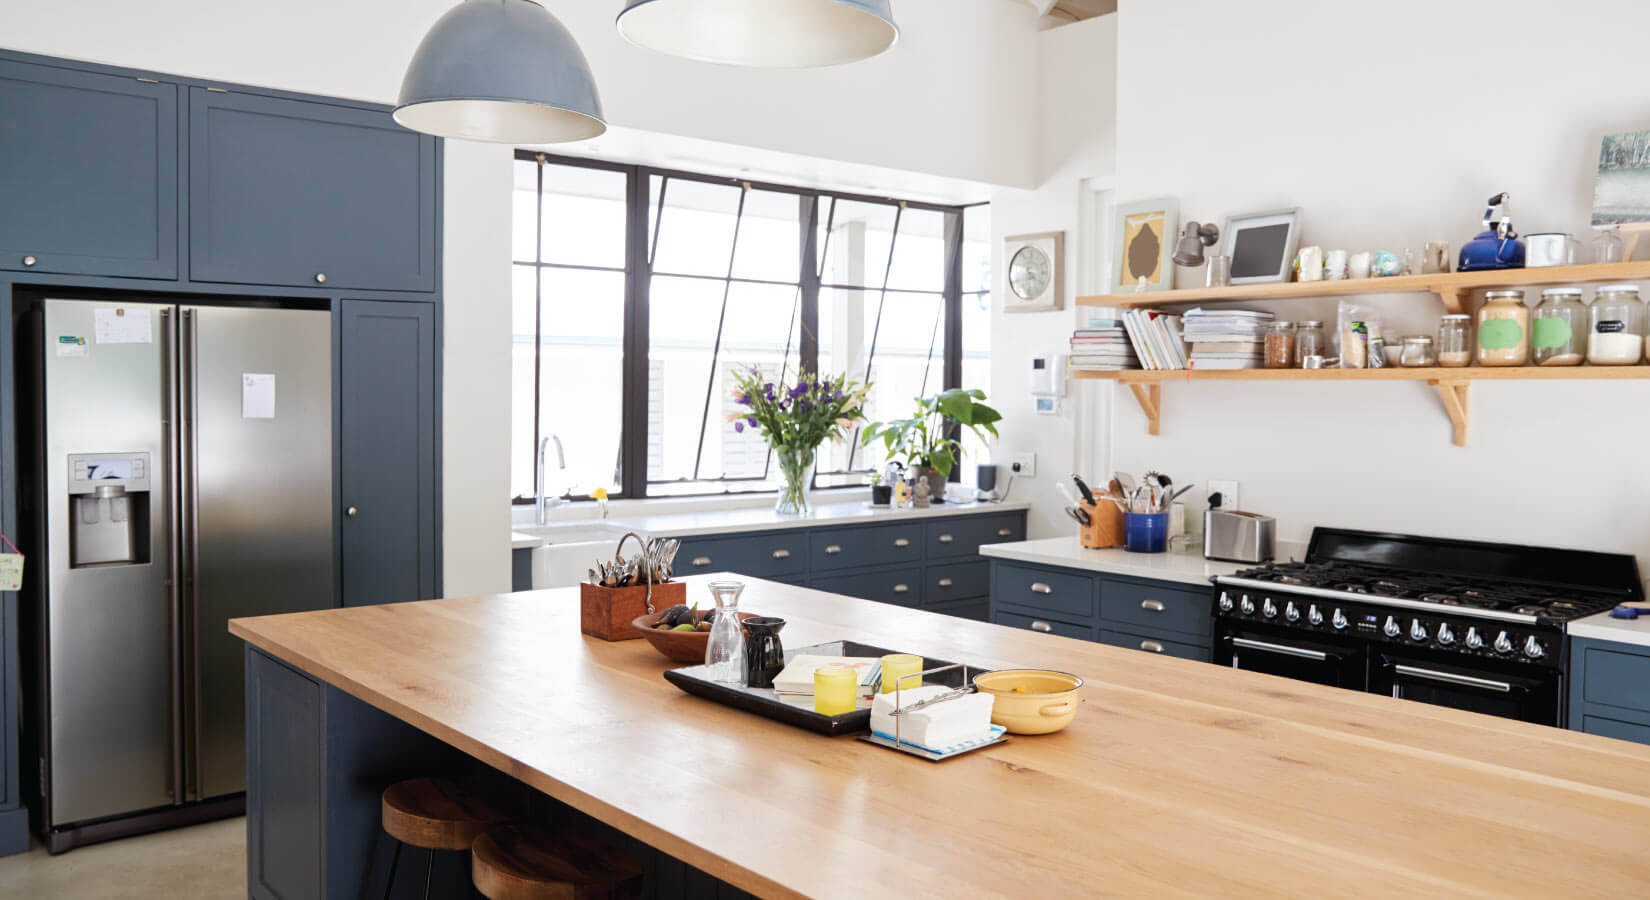 Kitchen with dark gray-blue cabinets, large butcher block island, and open wood shelves.